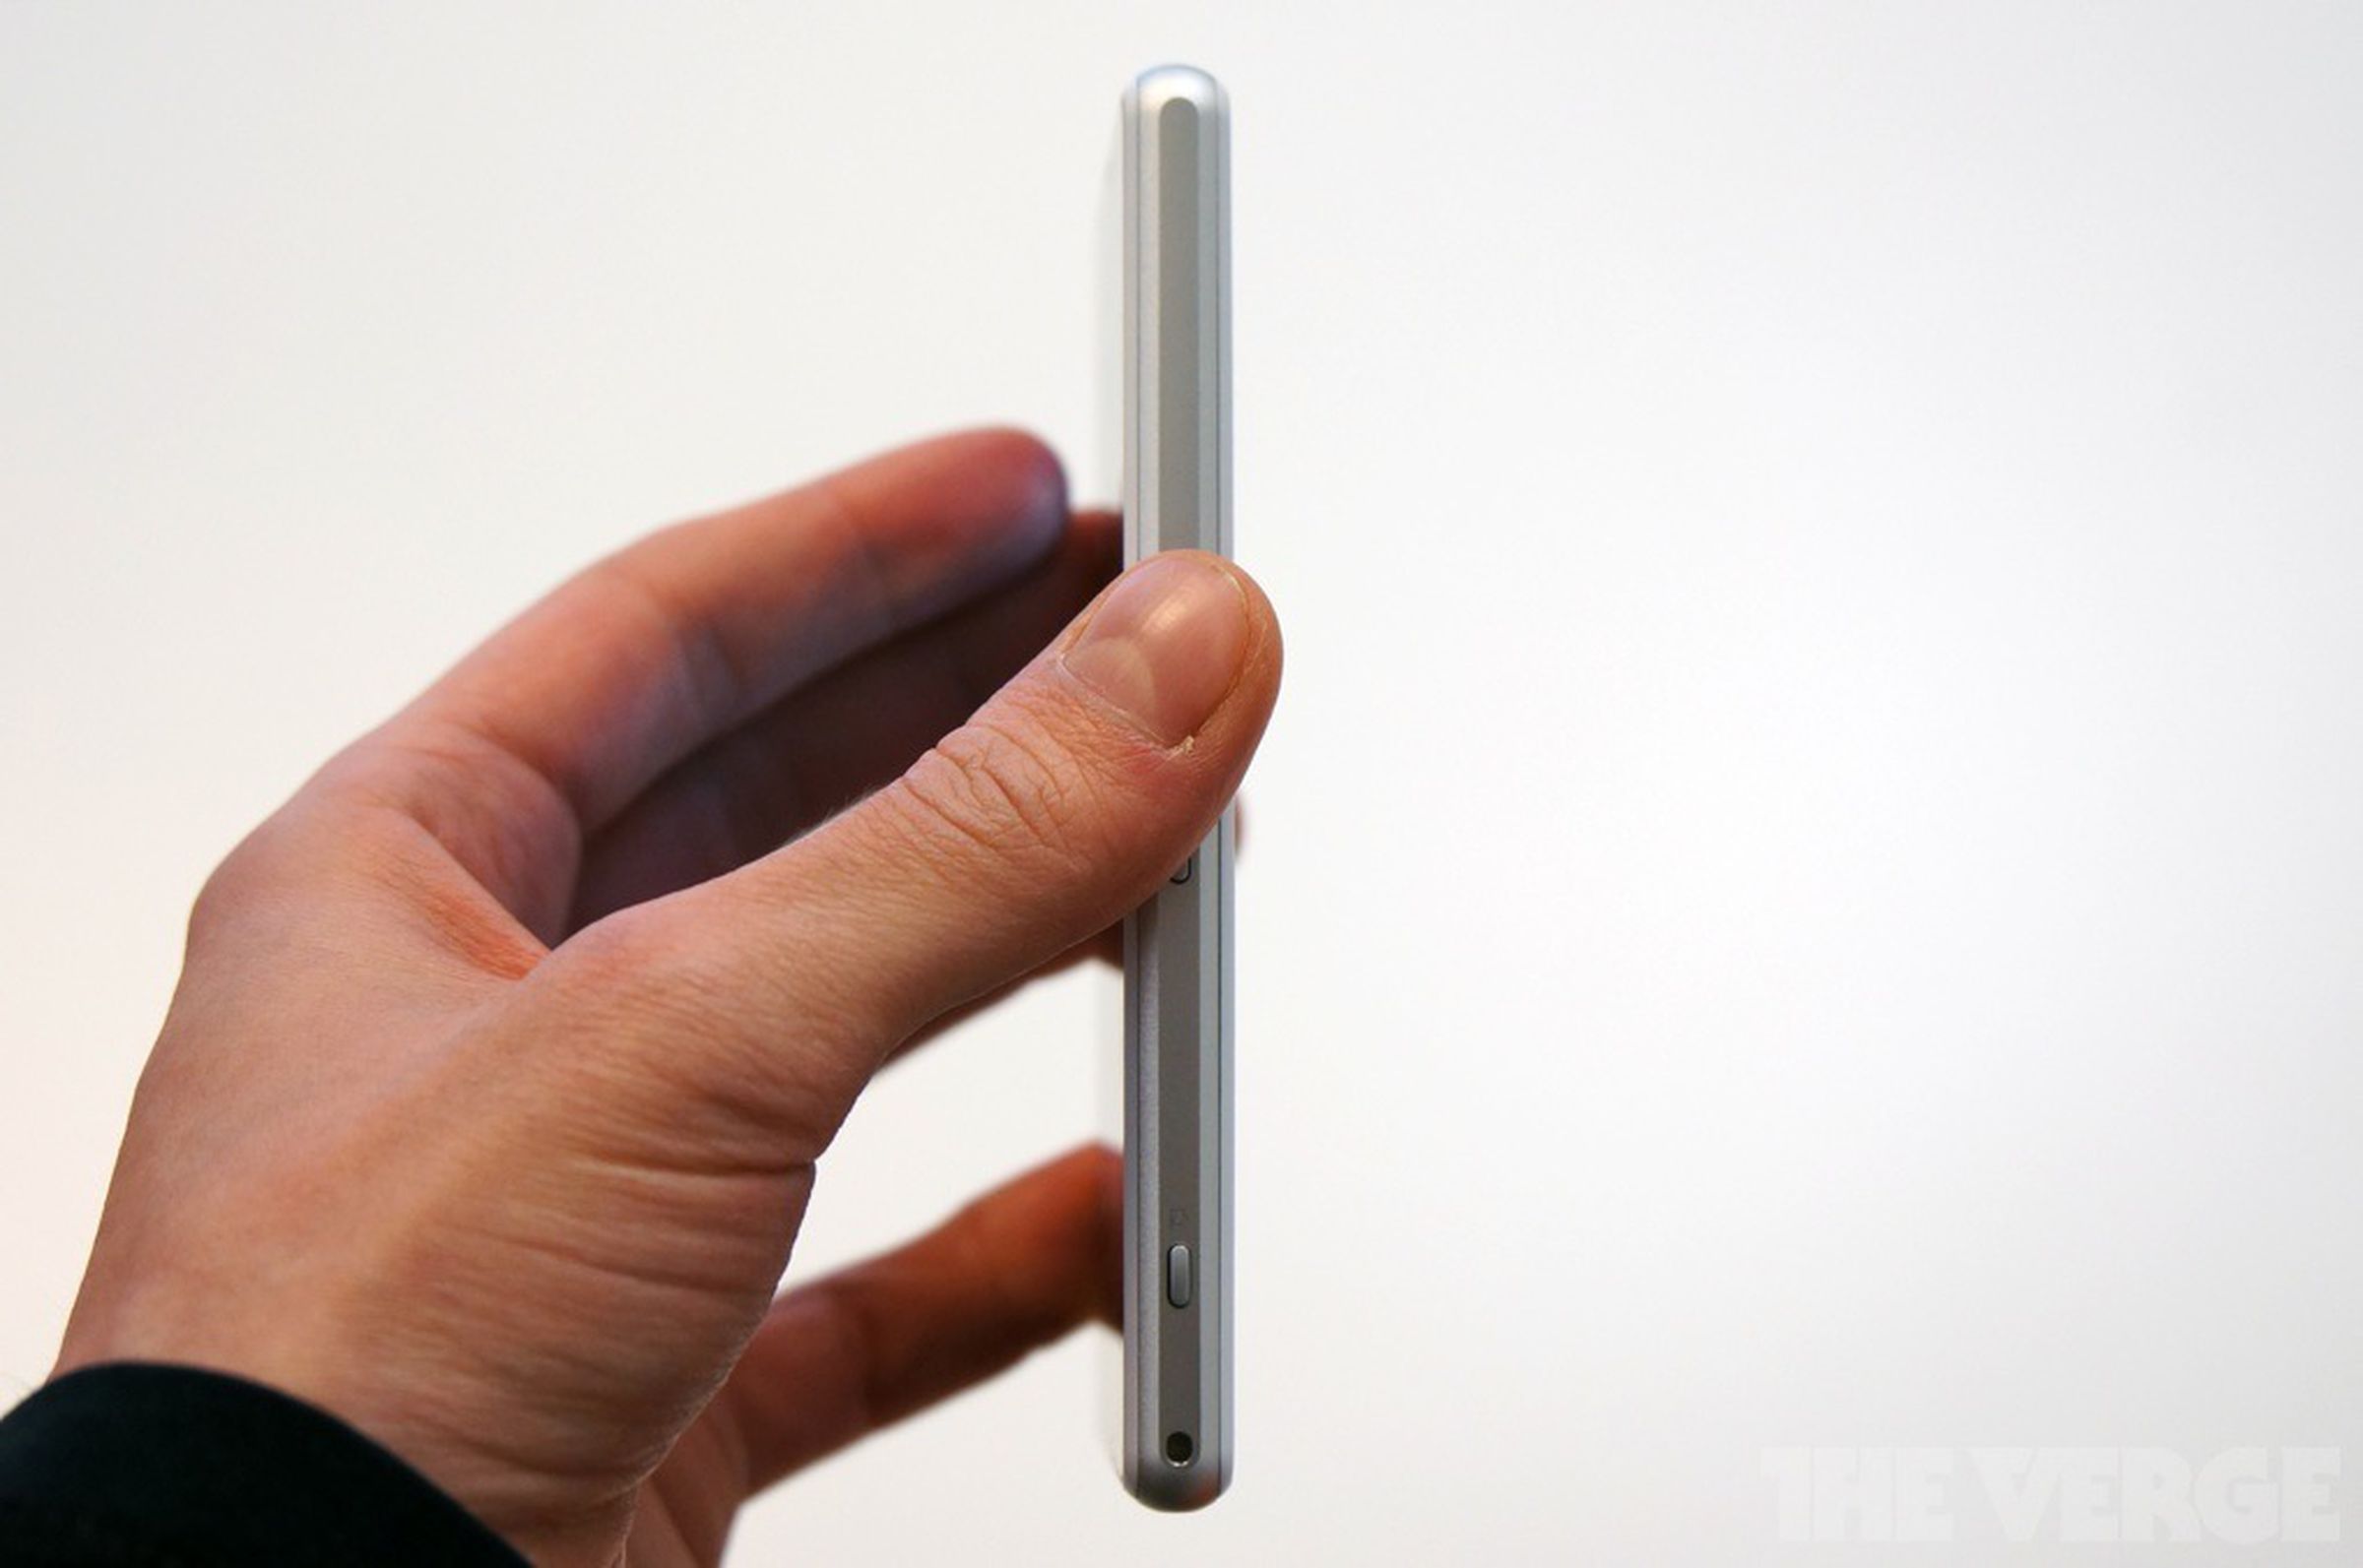 Sony Xperia Z1 Compact hands-on photos